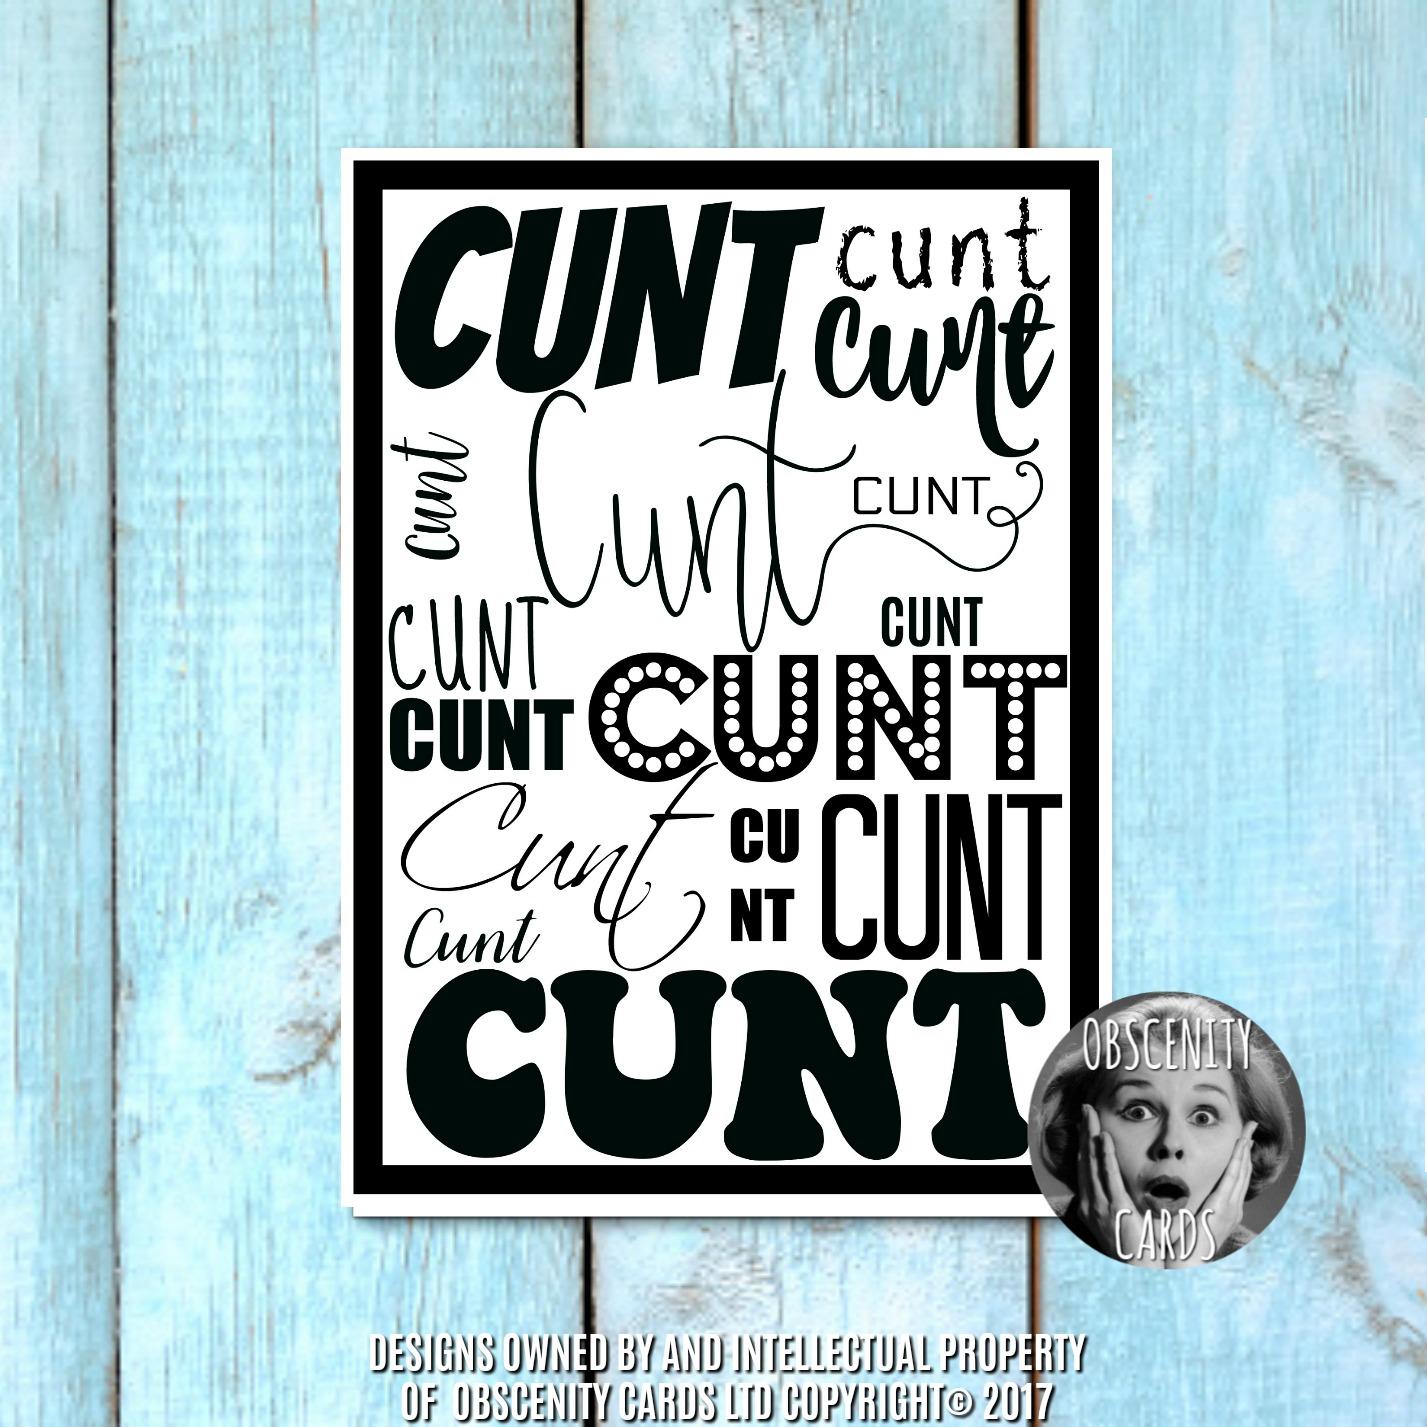 Obscene funny offensive INSULT cards by Obscenity cards. Obscene Funny Cards, Pens, Party Hats, Key rings, Magnets, Lighters & Loads More!